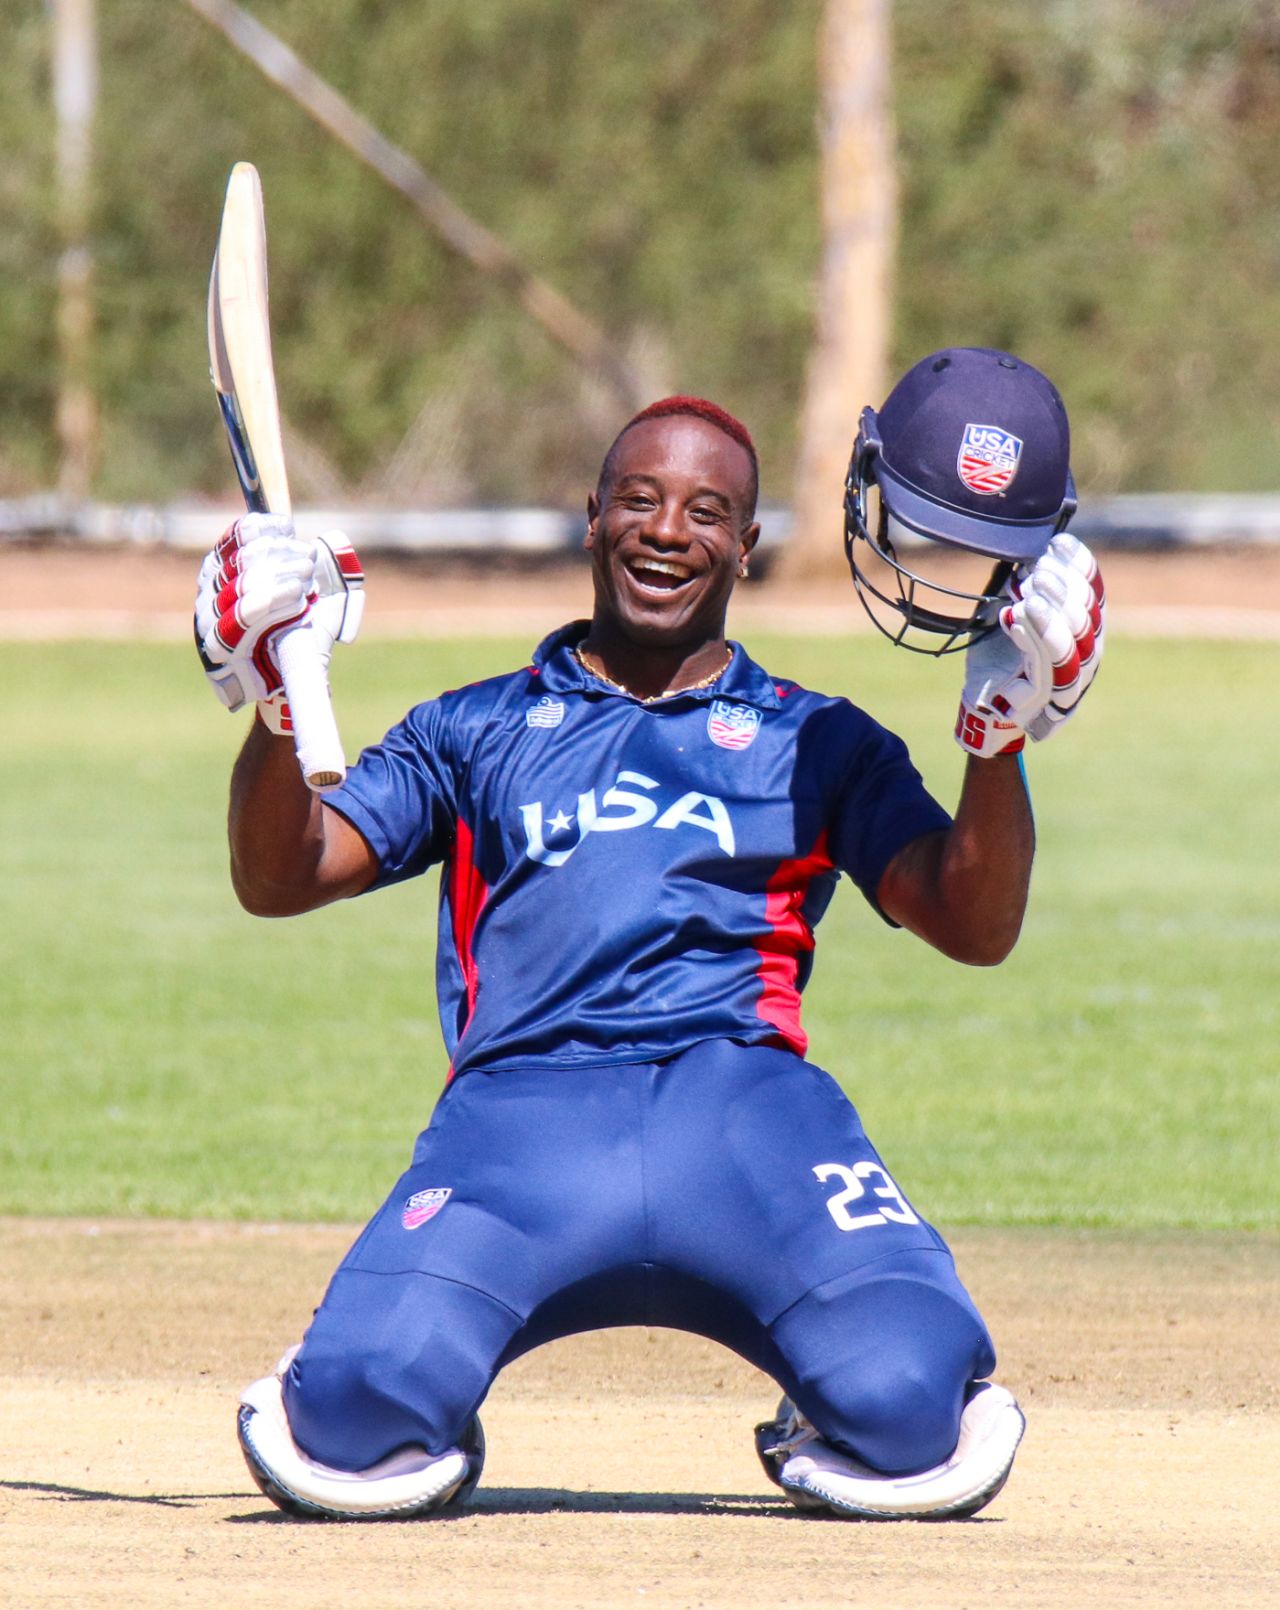 Xavier Marshall grins from ear to ear celebrating his century in style, Hong Kong v USA, WCL Division Two, Windhoek, April 24, 2019